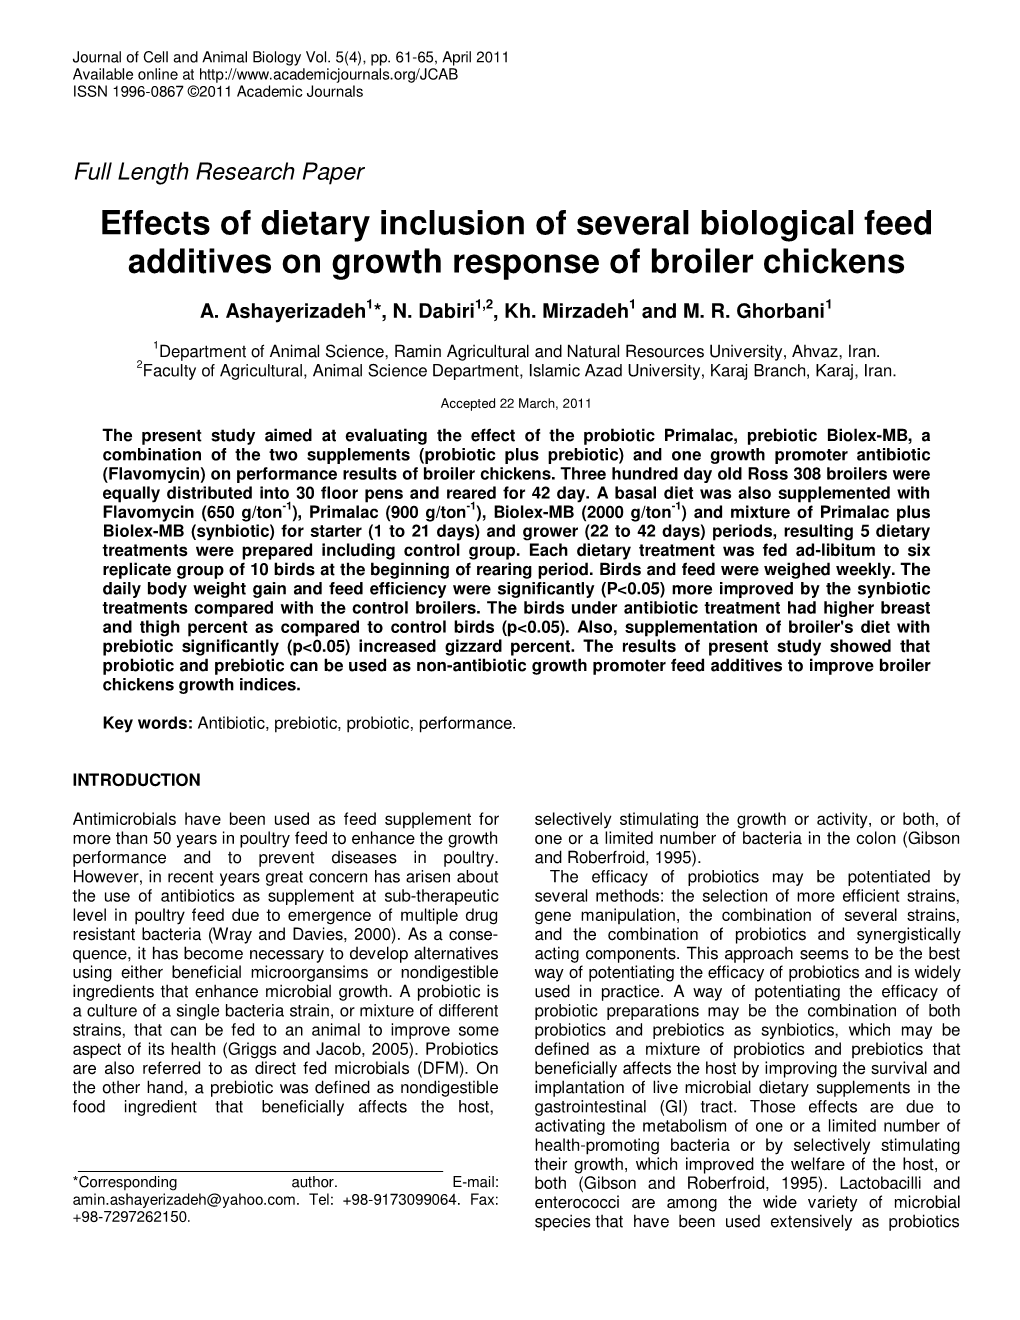 Effects of Dietary Inclusion of Several Biological Feed Additives on Growth Response of Broiler Chickens